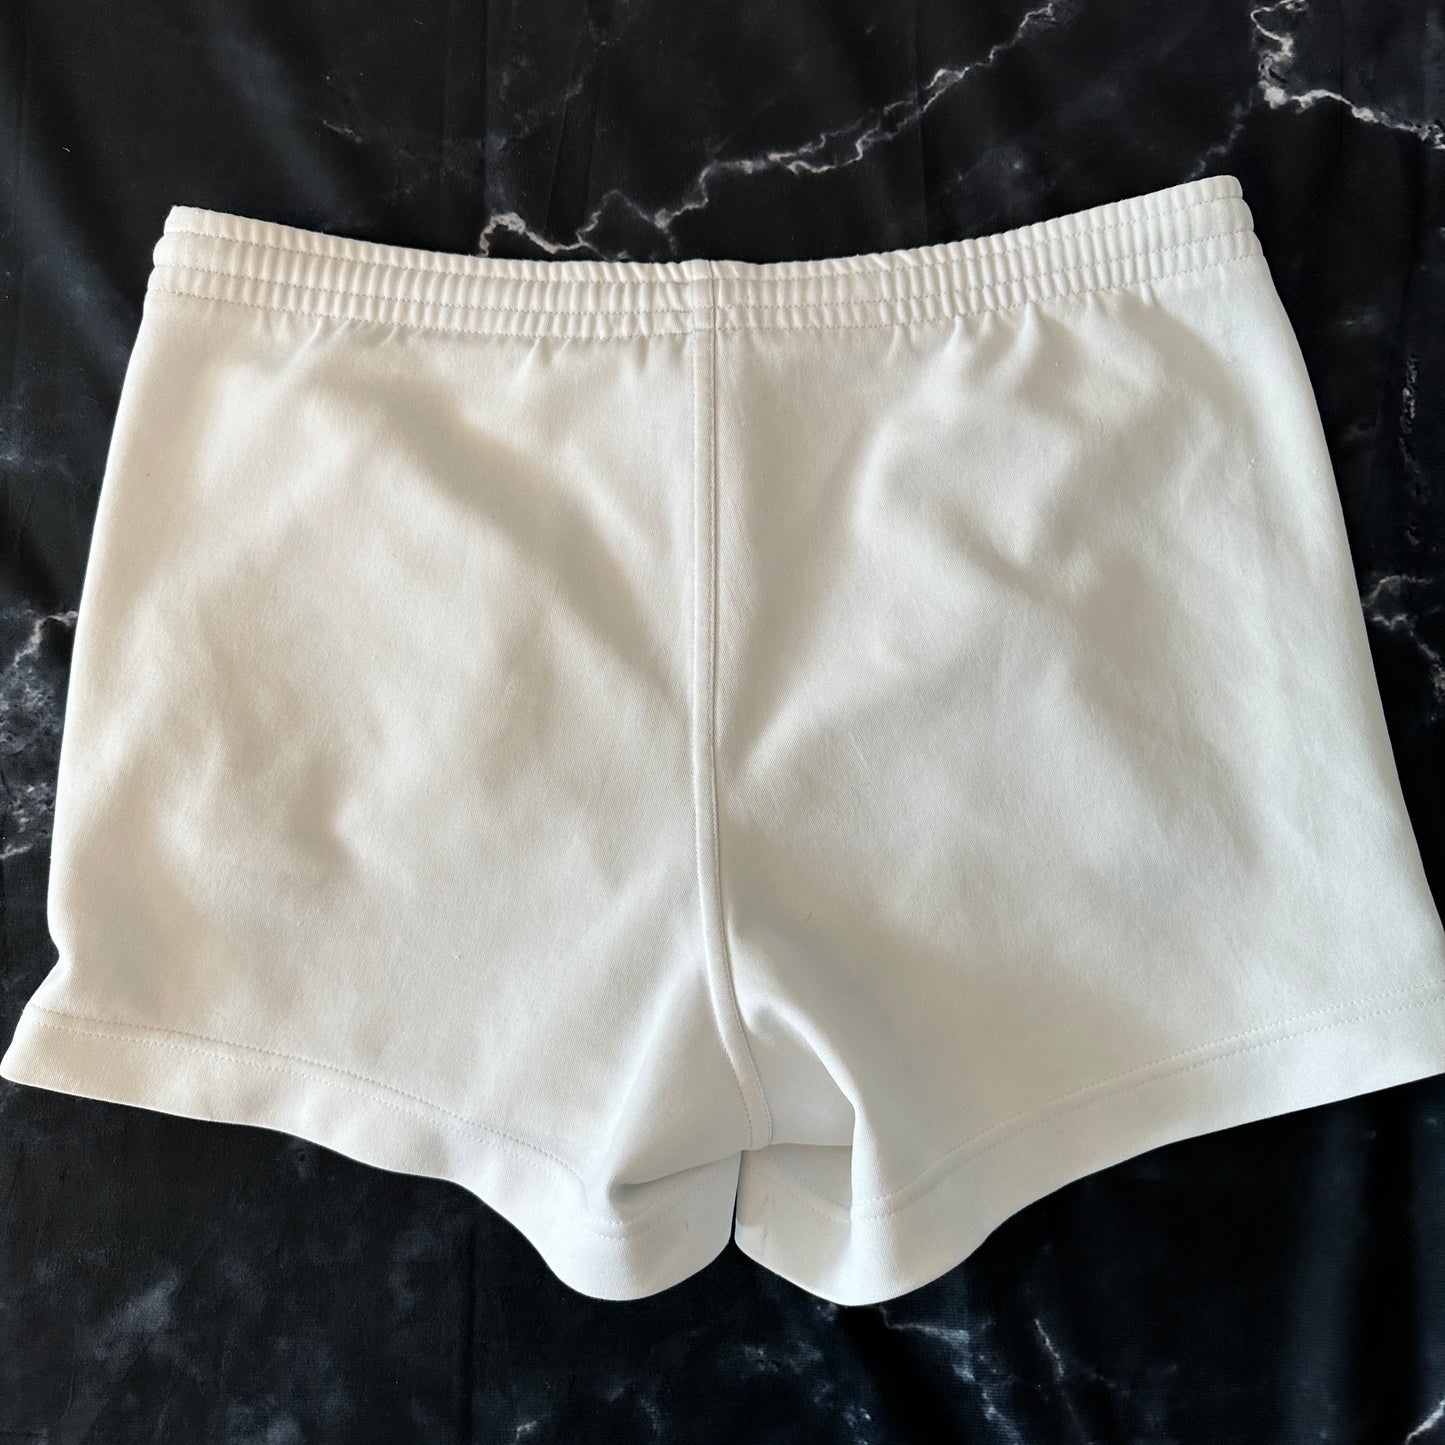 Lotto for Boris Becker 80s Tennis Shorts - L - Made in Italy